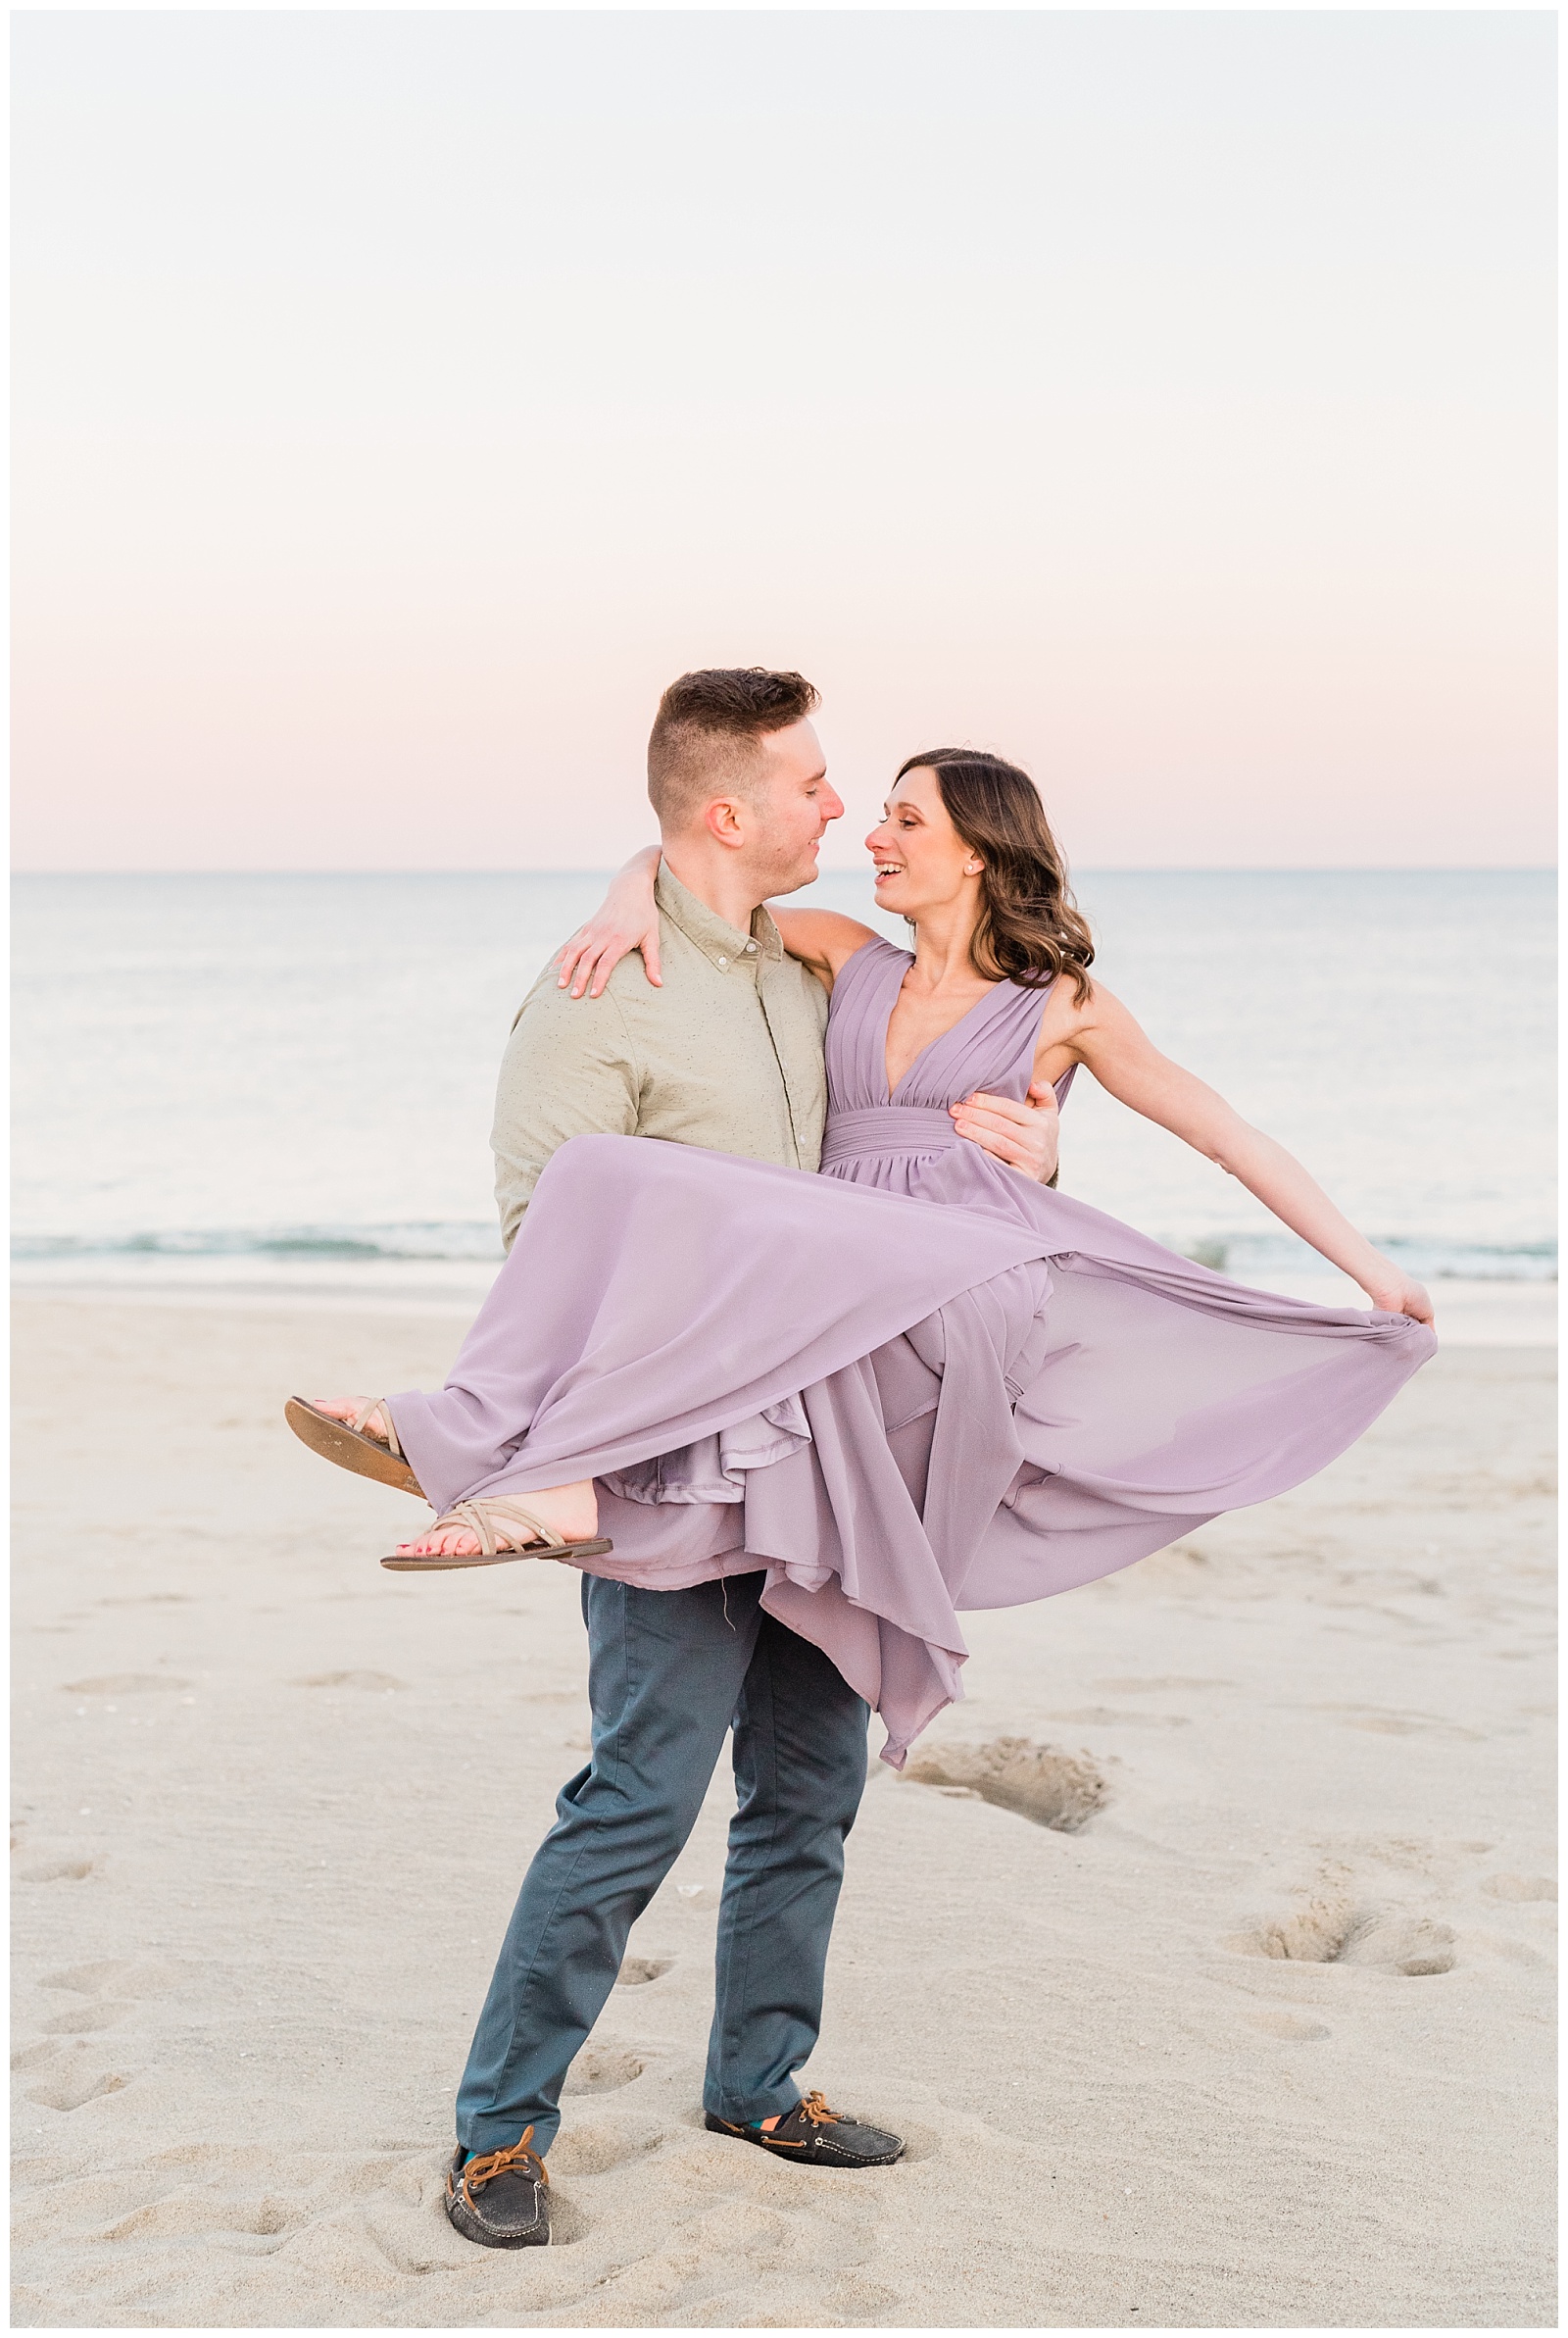 New Jersey, Engagement Session, Asbury Park, NJ, Wedding Photographer, Springtime, Light and Airy, Golden Hour, Beach, Spin